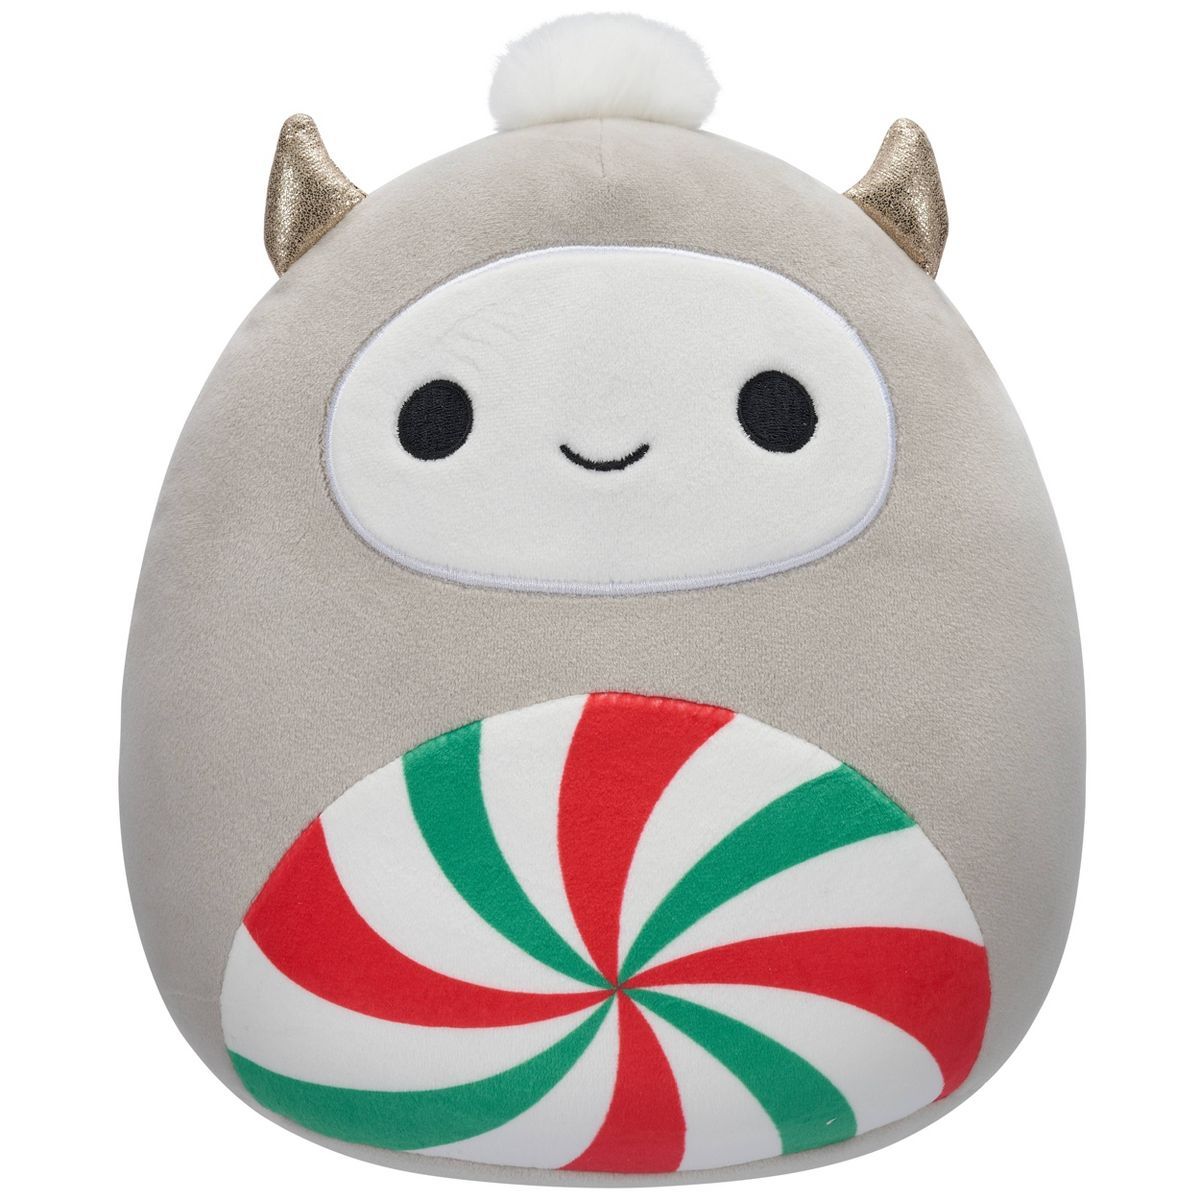 Squishmallows 8" Gray Yeti with Peppermint Swirl Belly Little Plush | Target